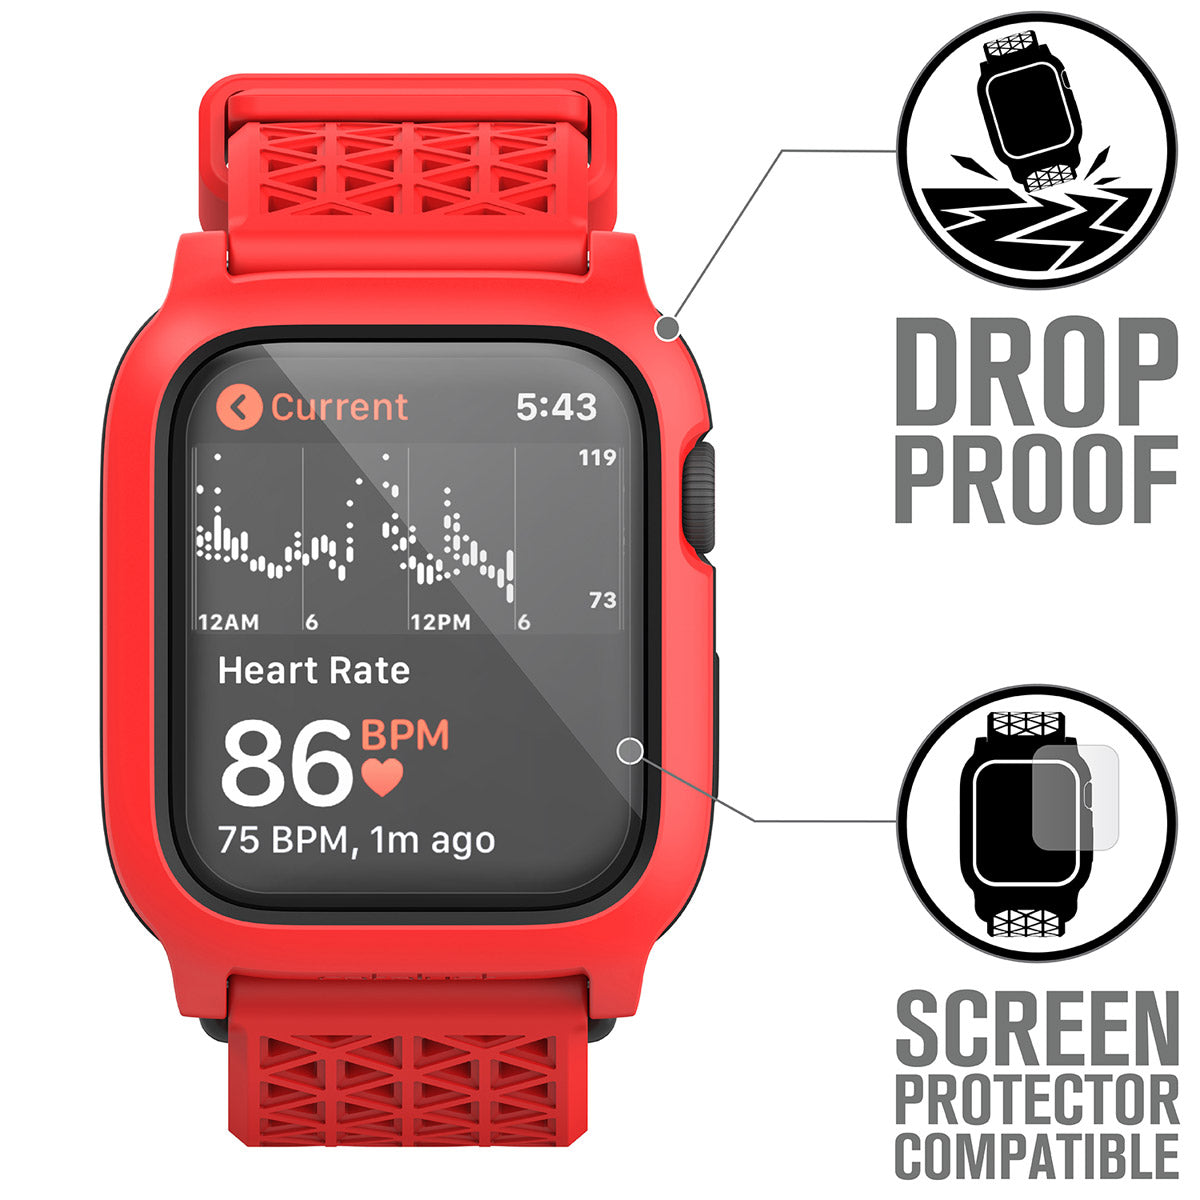 catalyst apple watch series 6 5 4 se gen 21 44mm 40mm impact protection case sport band flame red showing drop proof and screen protector comaptibility text reads drop proof screen protector compatible